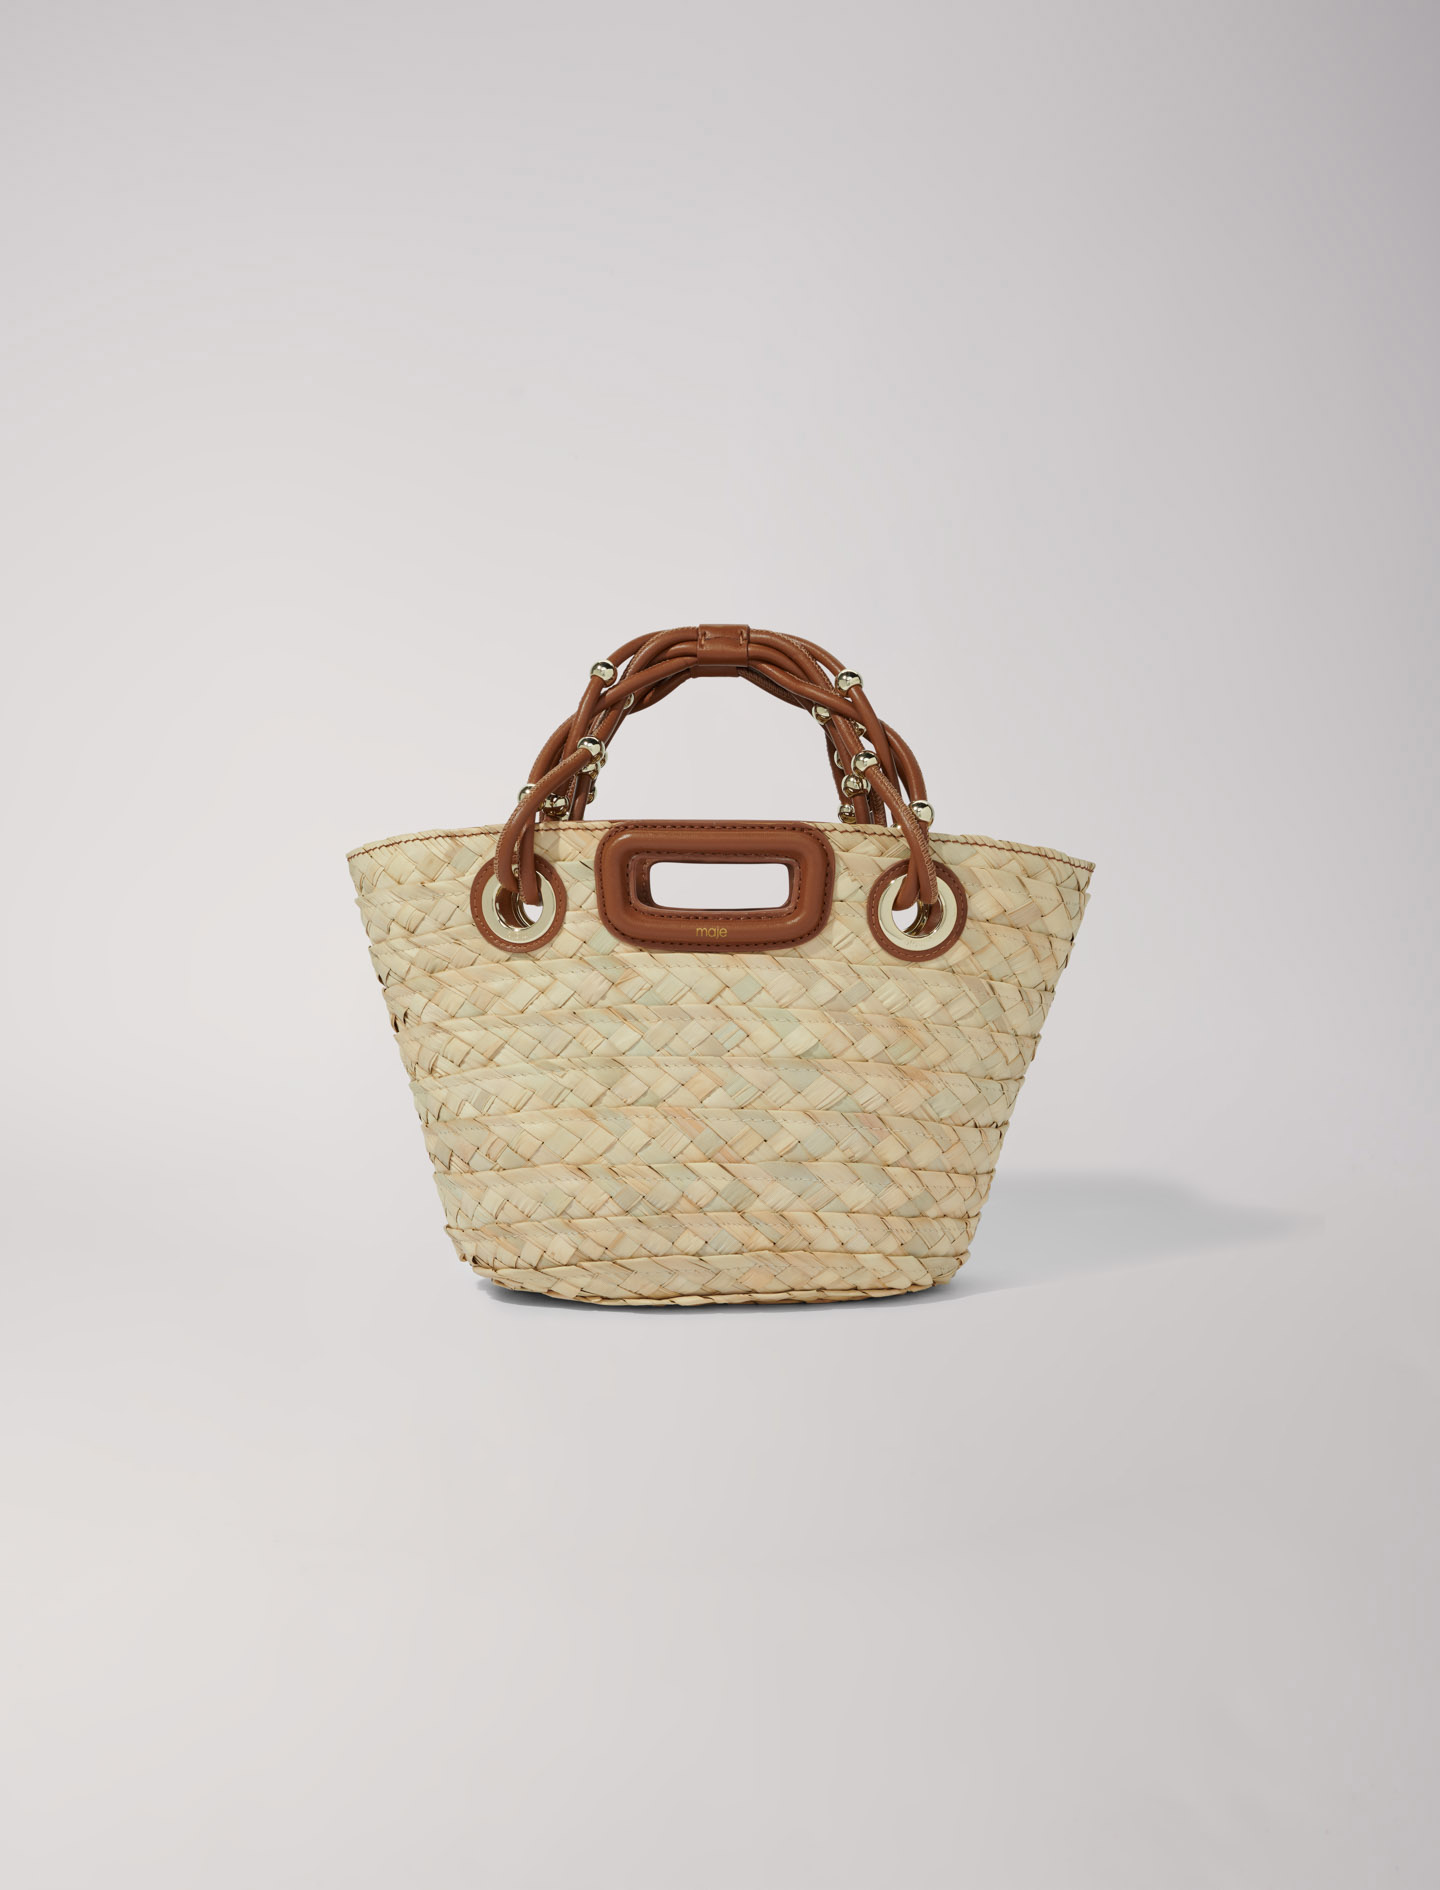 Mixte's palm Lining: Mini woven basket bag for Spring/Summer, size Mixte-All Bags-OS (ONE SIZE), in color Camel / Brown